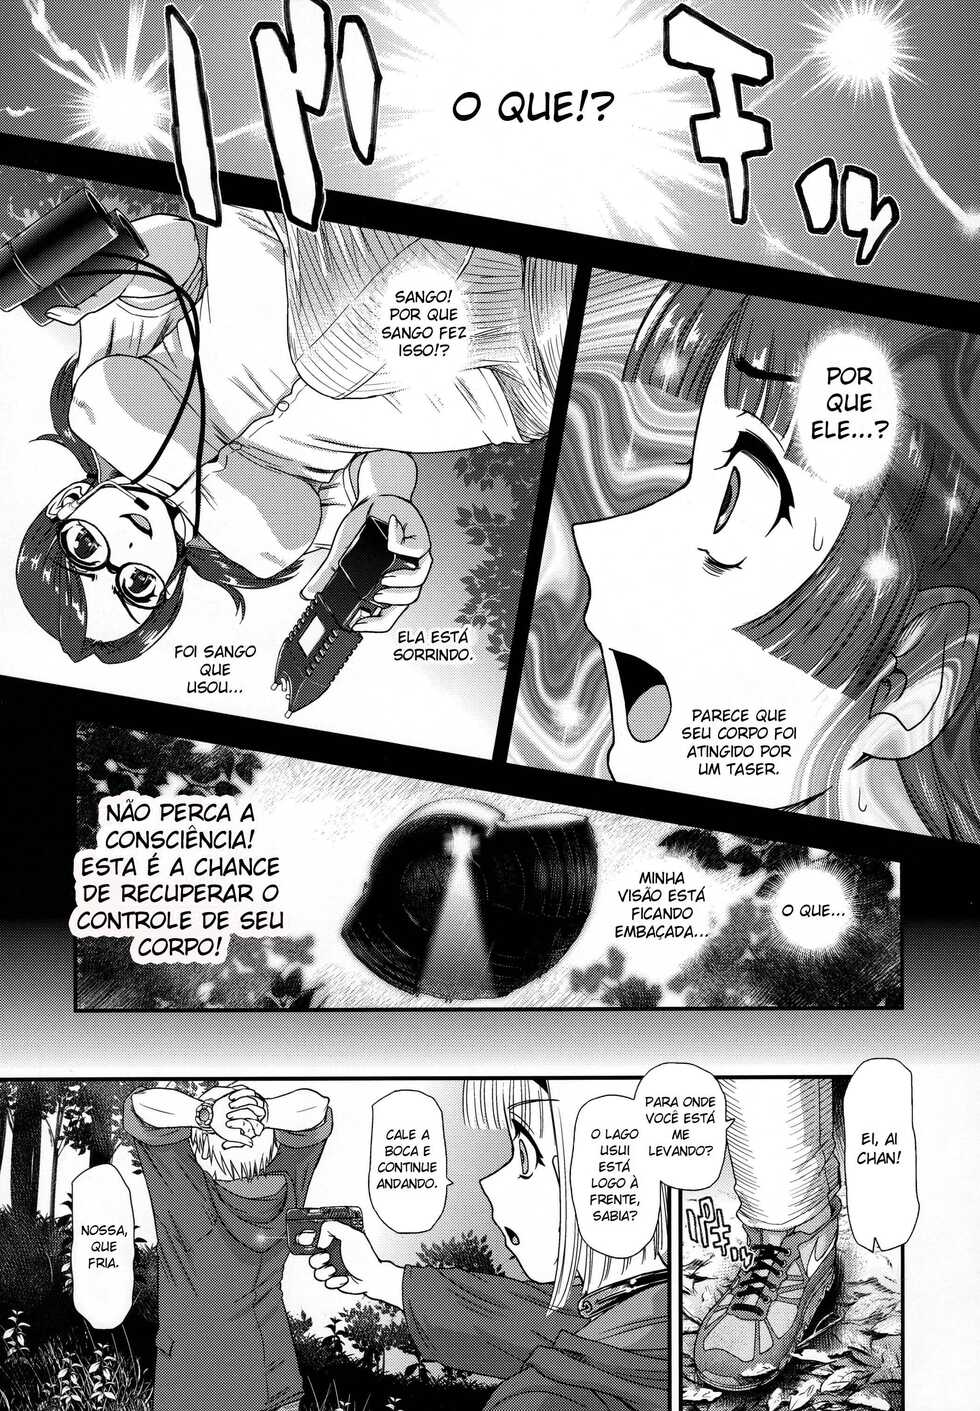 (C95) [Behind Moon (Dulce-Q)] DR:II ep.7 ~Dulce Report~ [Portuguese-BR] - Page 6